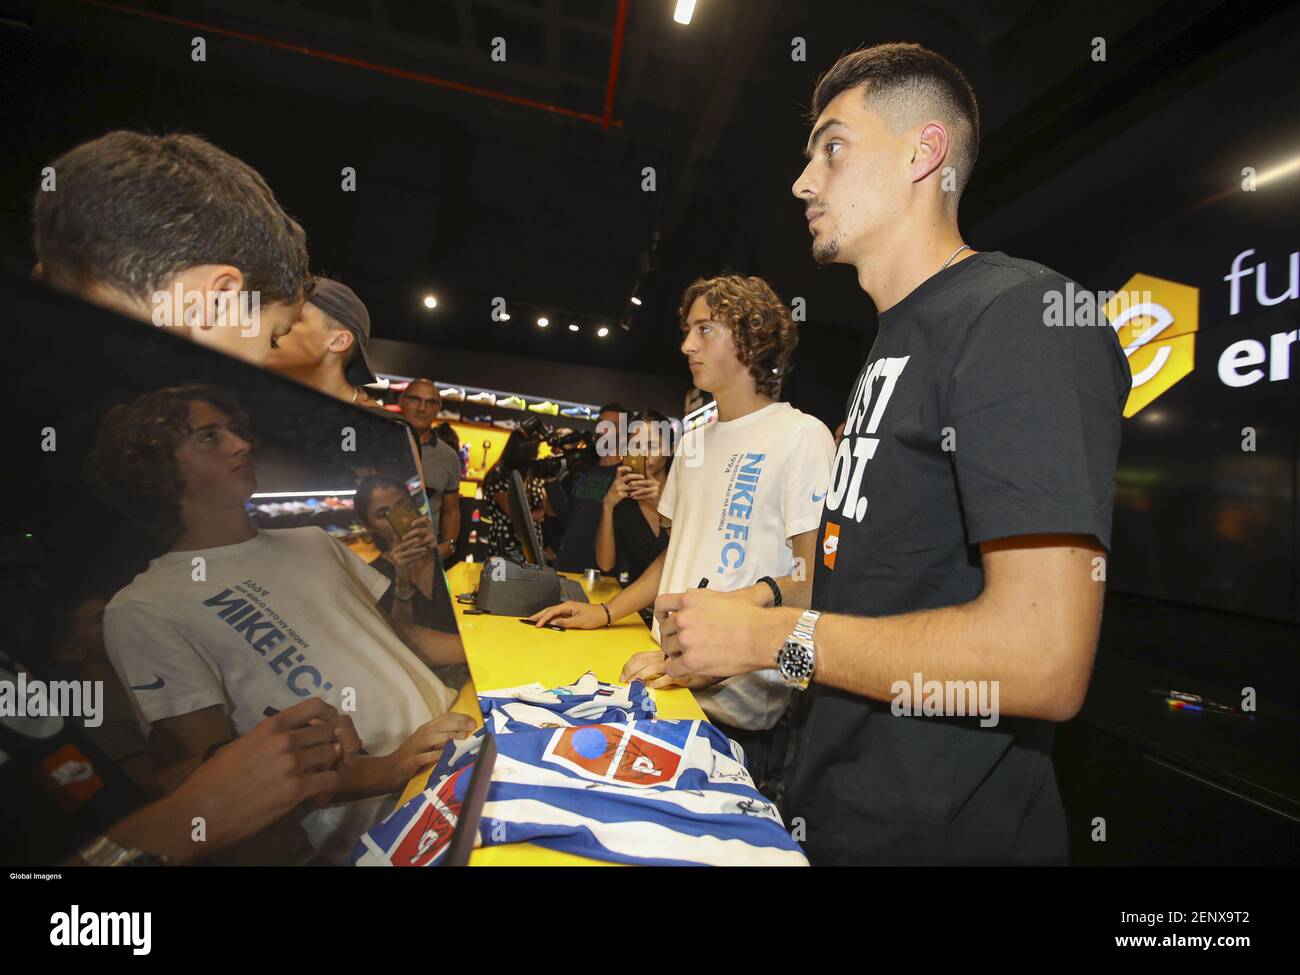 Porto, 09/27/2019 - This afternoon took place at the Alameda Shop & Spot  Shopping Center, the opening of the sporting goods store Futbolemotion,  which was attended by FC Porto players Fabio Silva